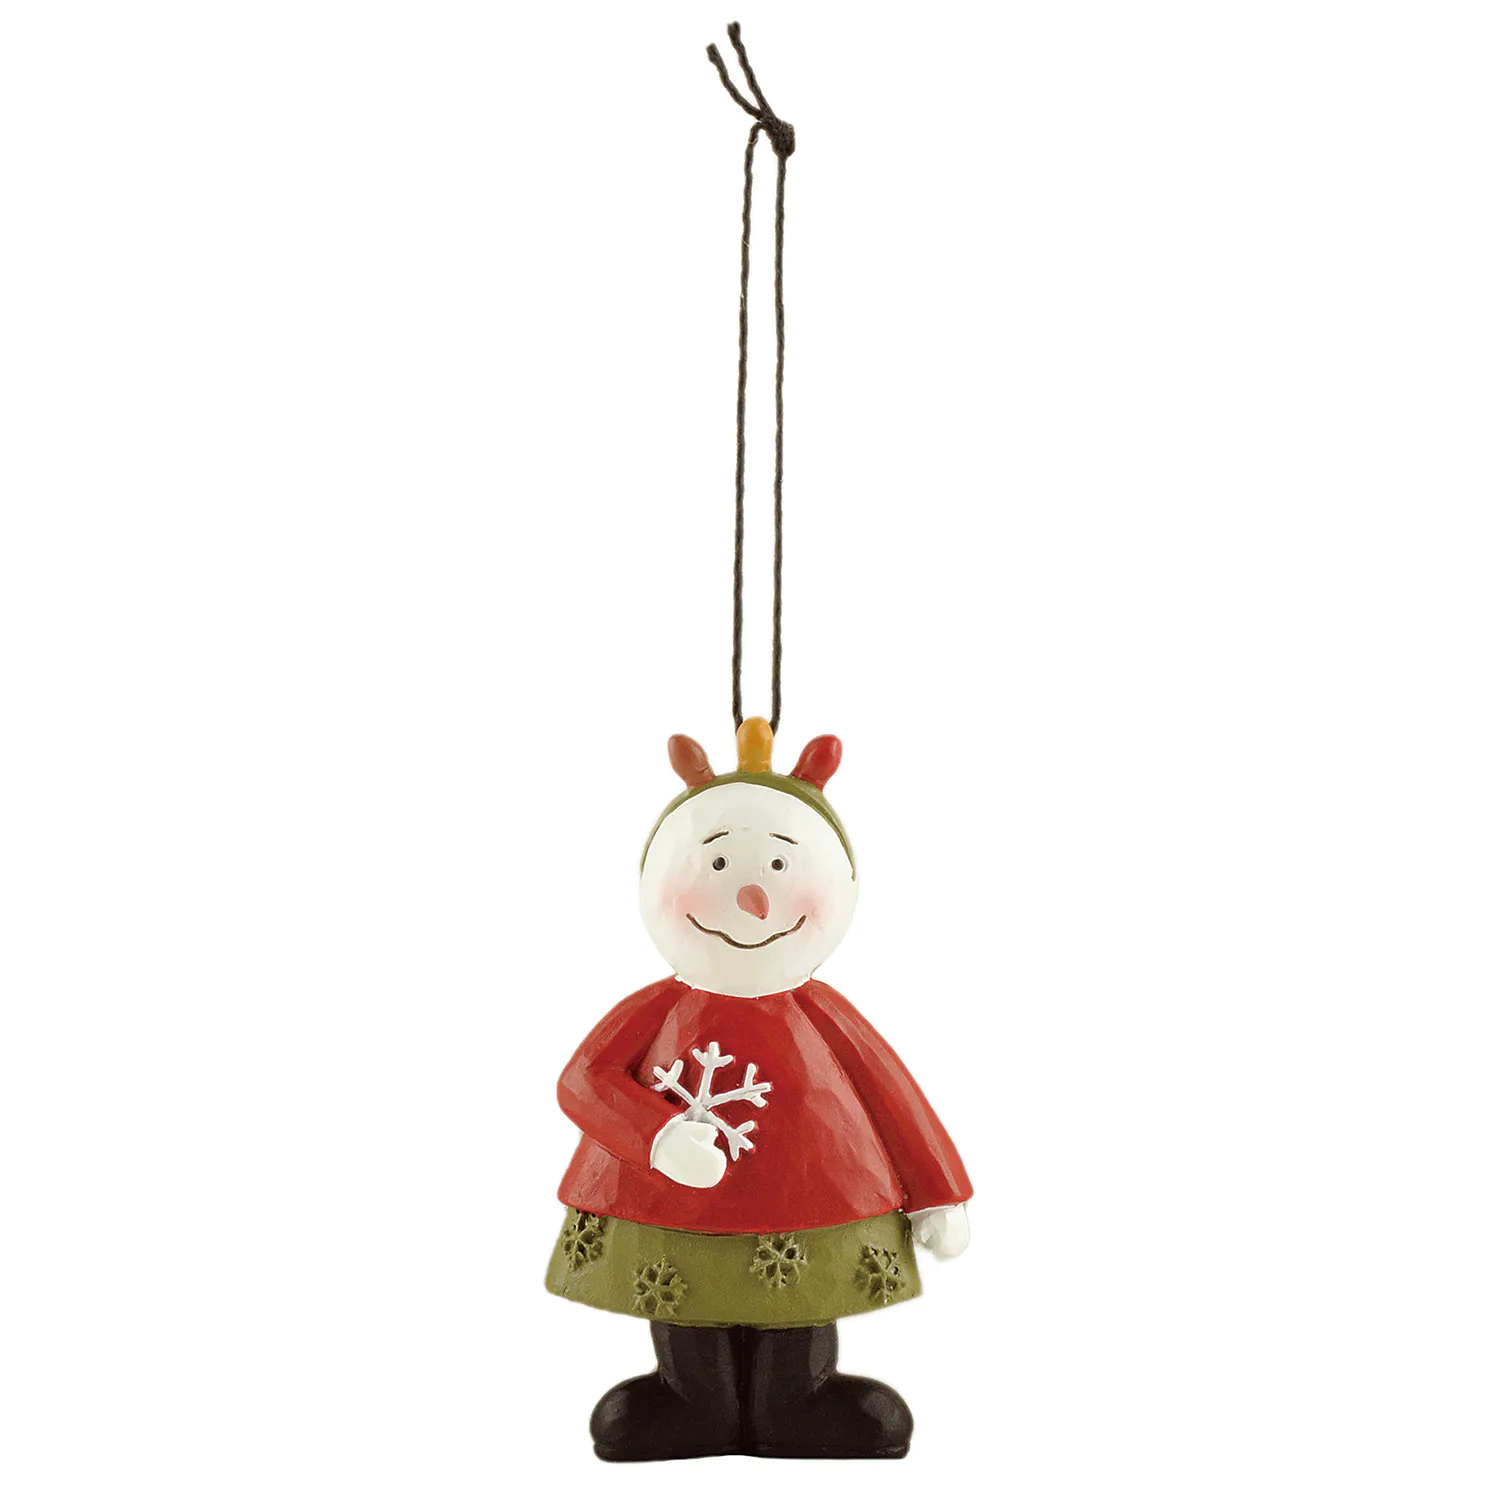 Whimsical Hand-Painted Resin Snowman Figurine Jolly Festive Snowmen with Snowflakes Ornament for Christmas Tree Decoration 238-52148